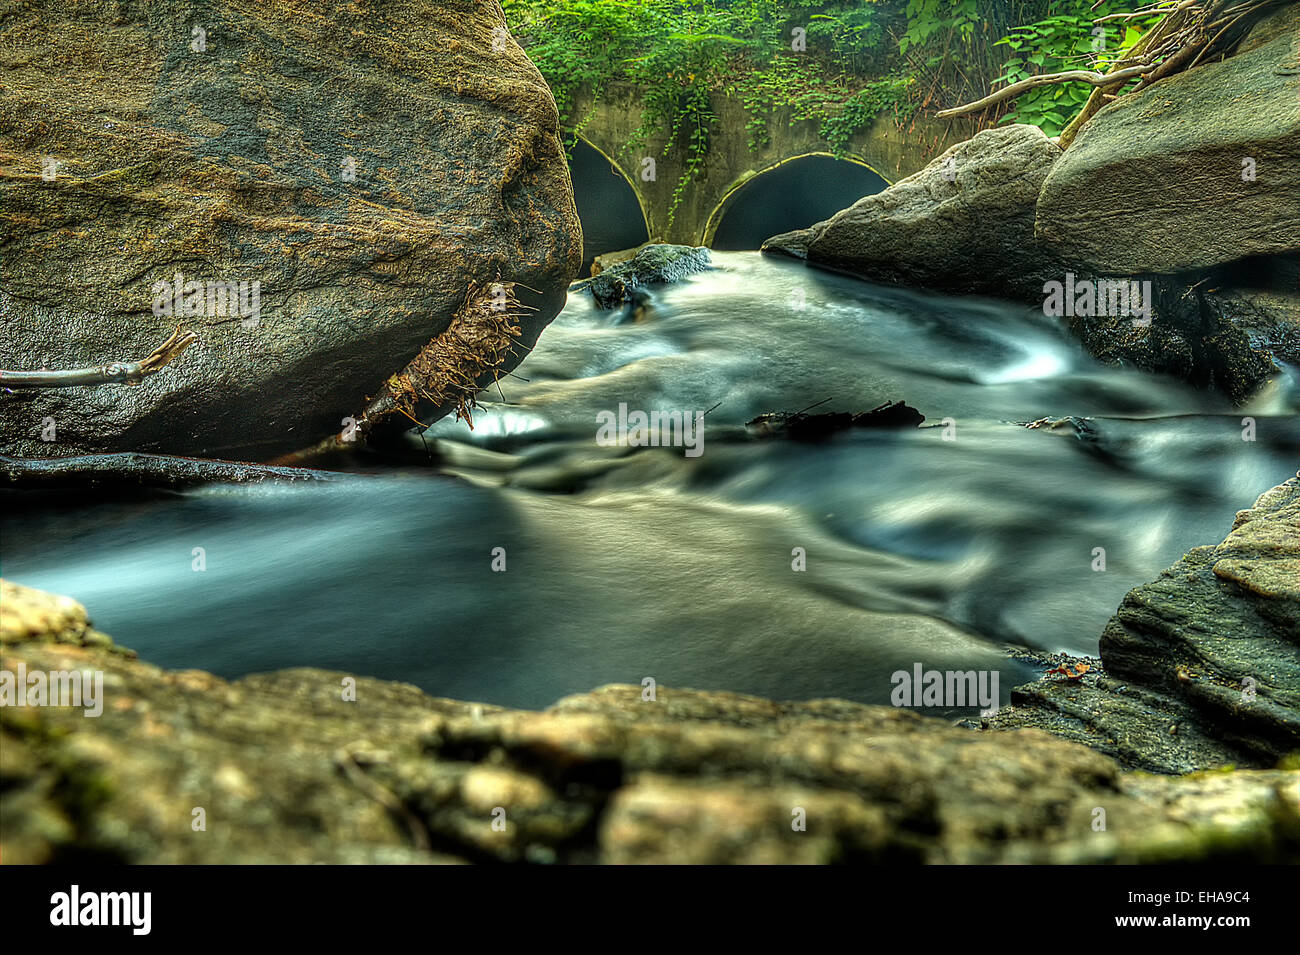 A closeup, long exposure shot of a forest stream traveling through some rocks. Stock Photo